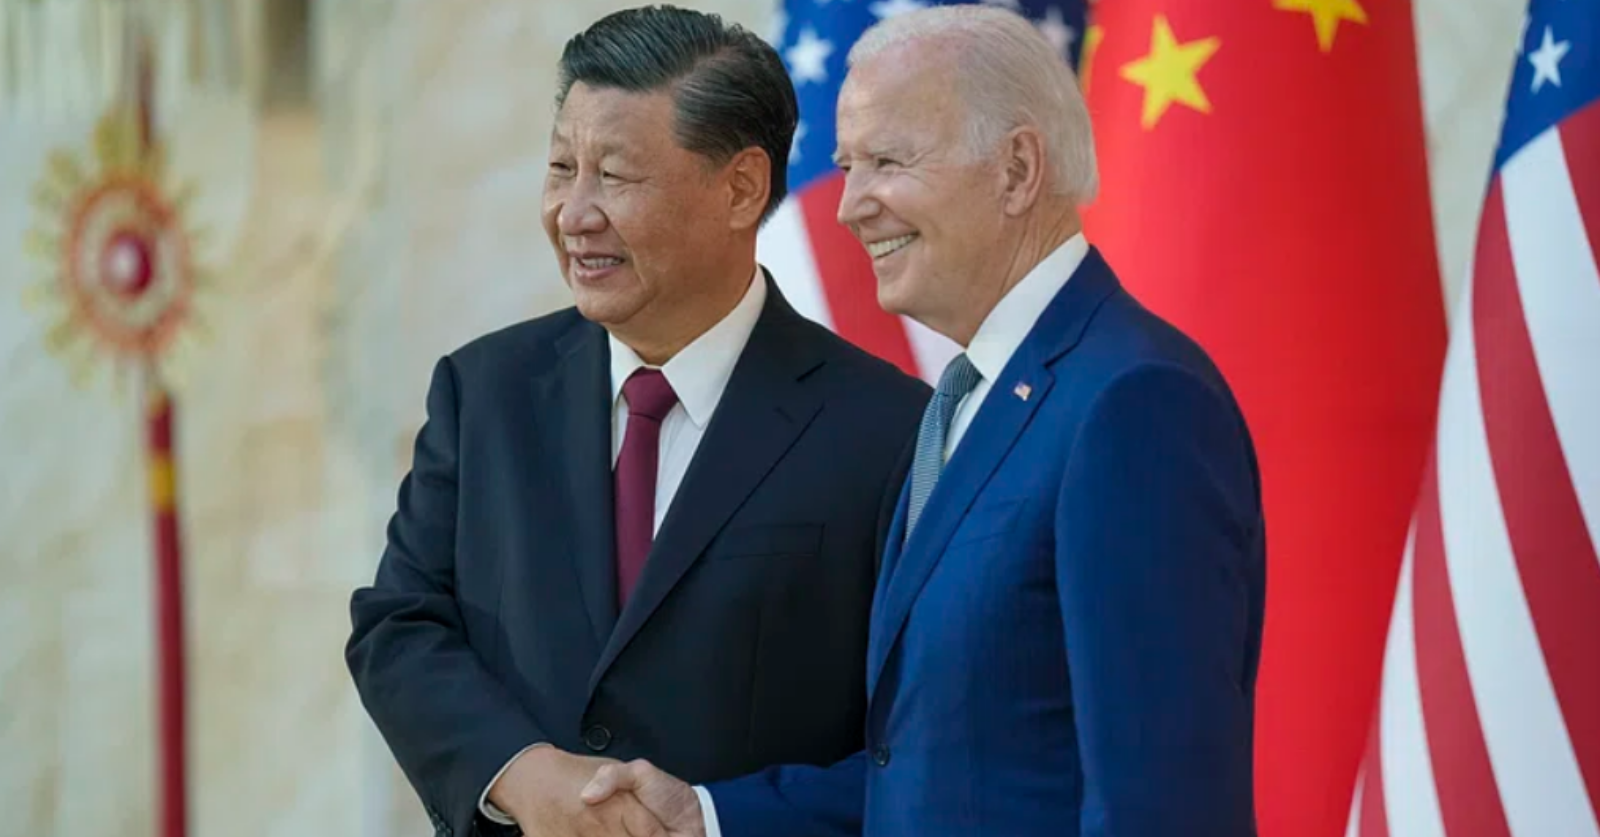 Biden announces agreement with China to curb illicit fentanyl production